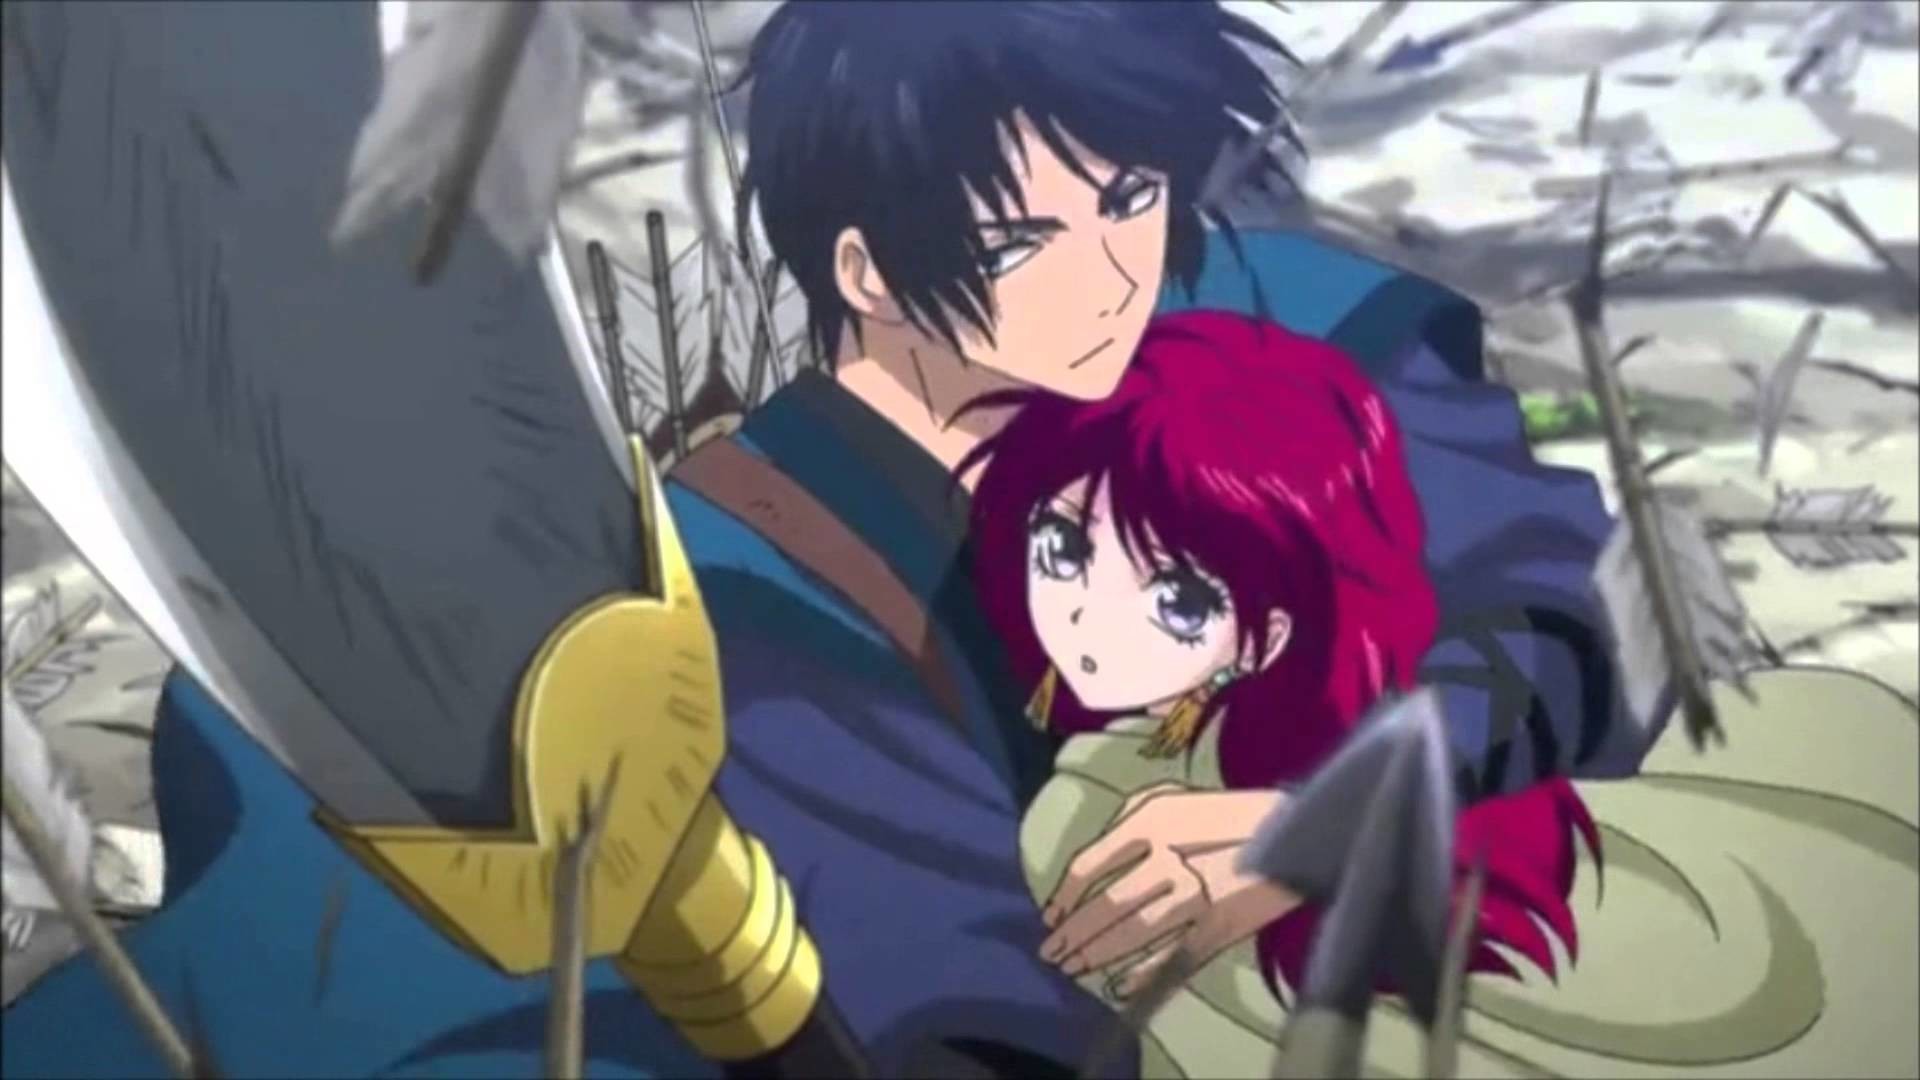 1920x1080 9 best Hak images on Pinterest | Akatsuki no yona, Google search and The  dawn